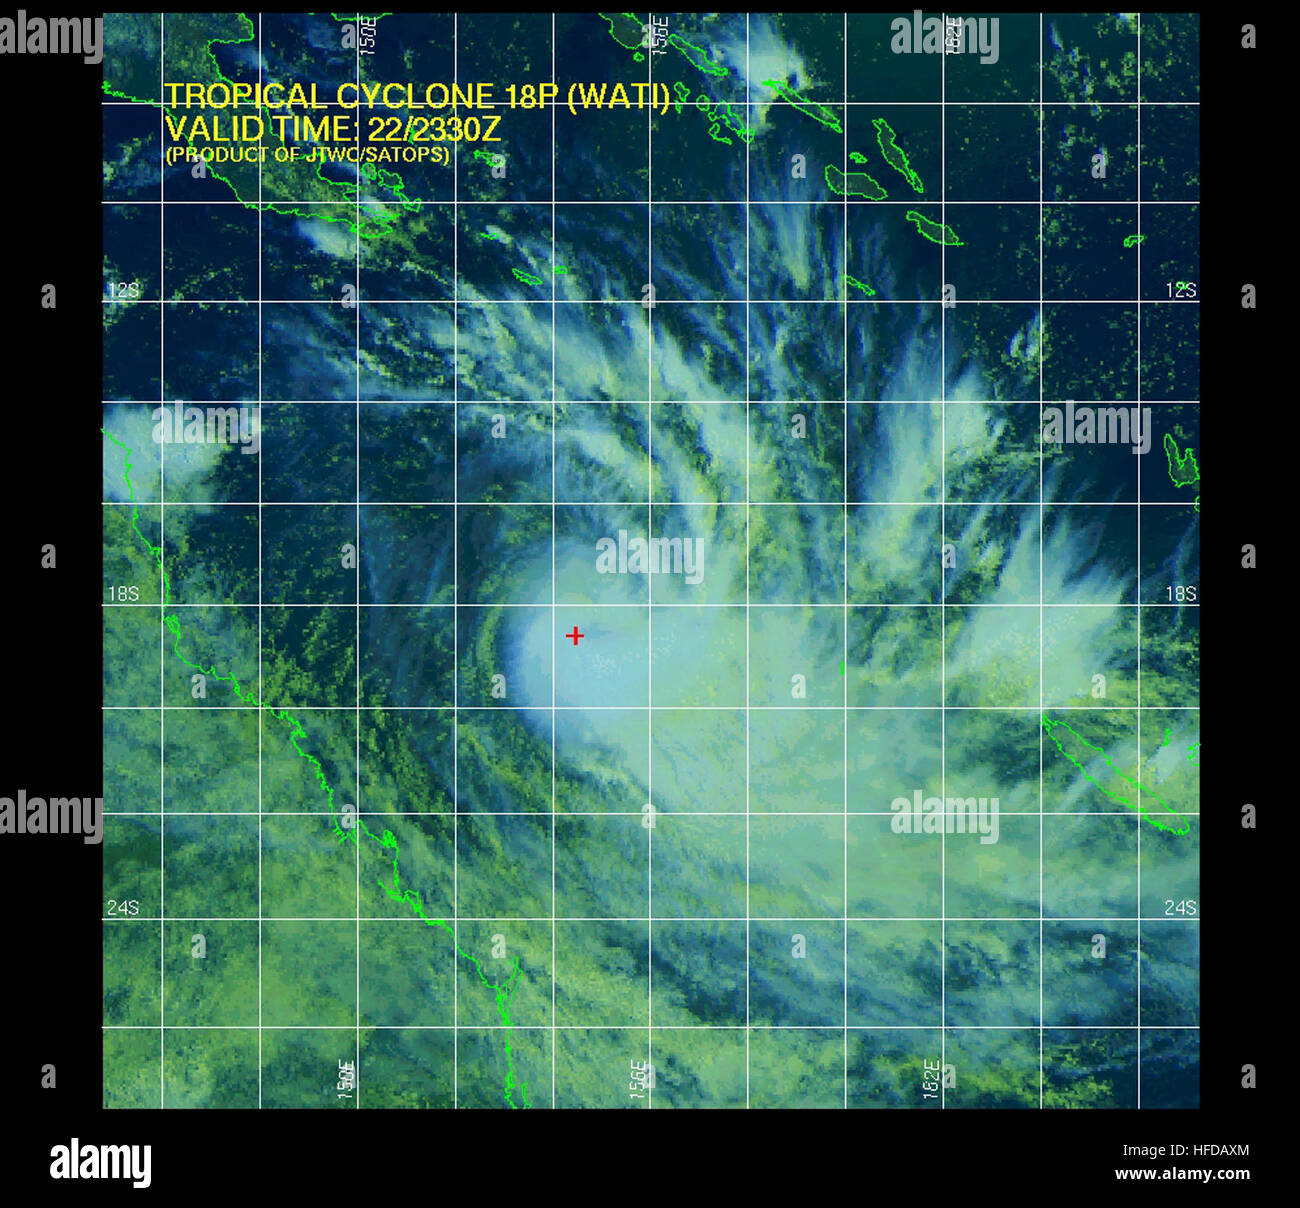 Cyclone tropical 18P (Wati) 2006-03-22 2330Z Banque D'Images